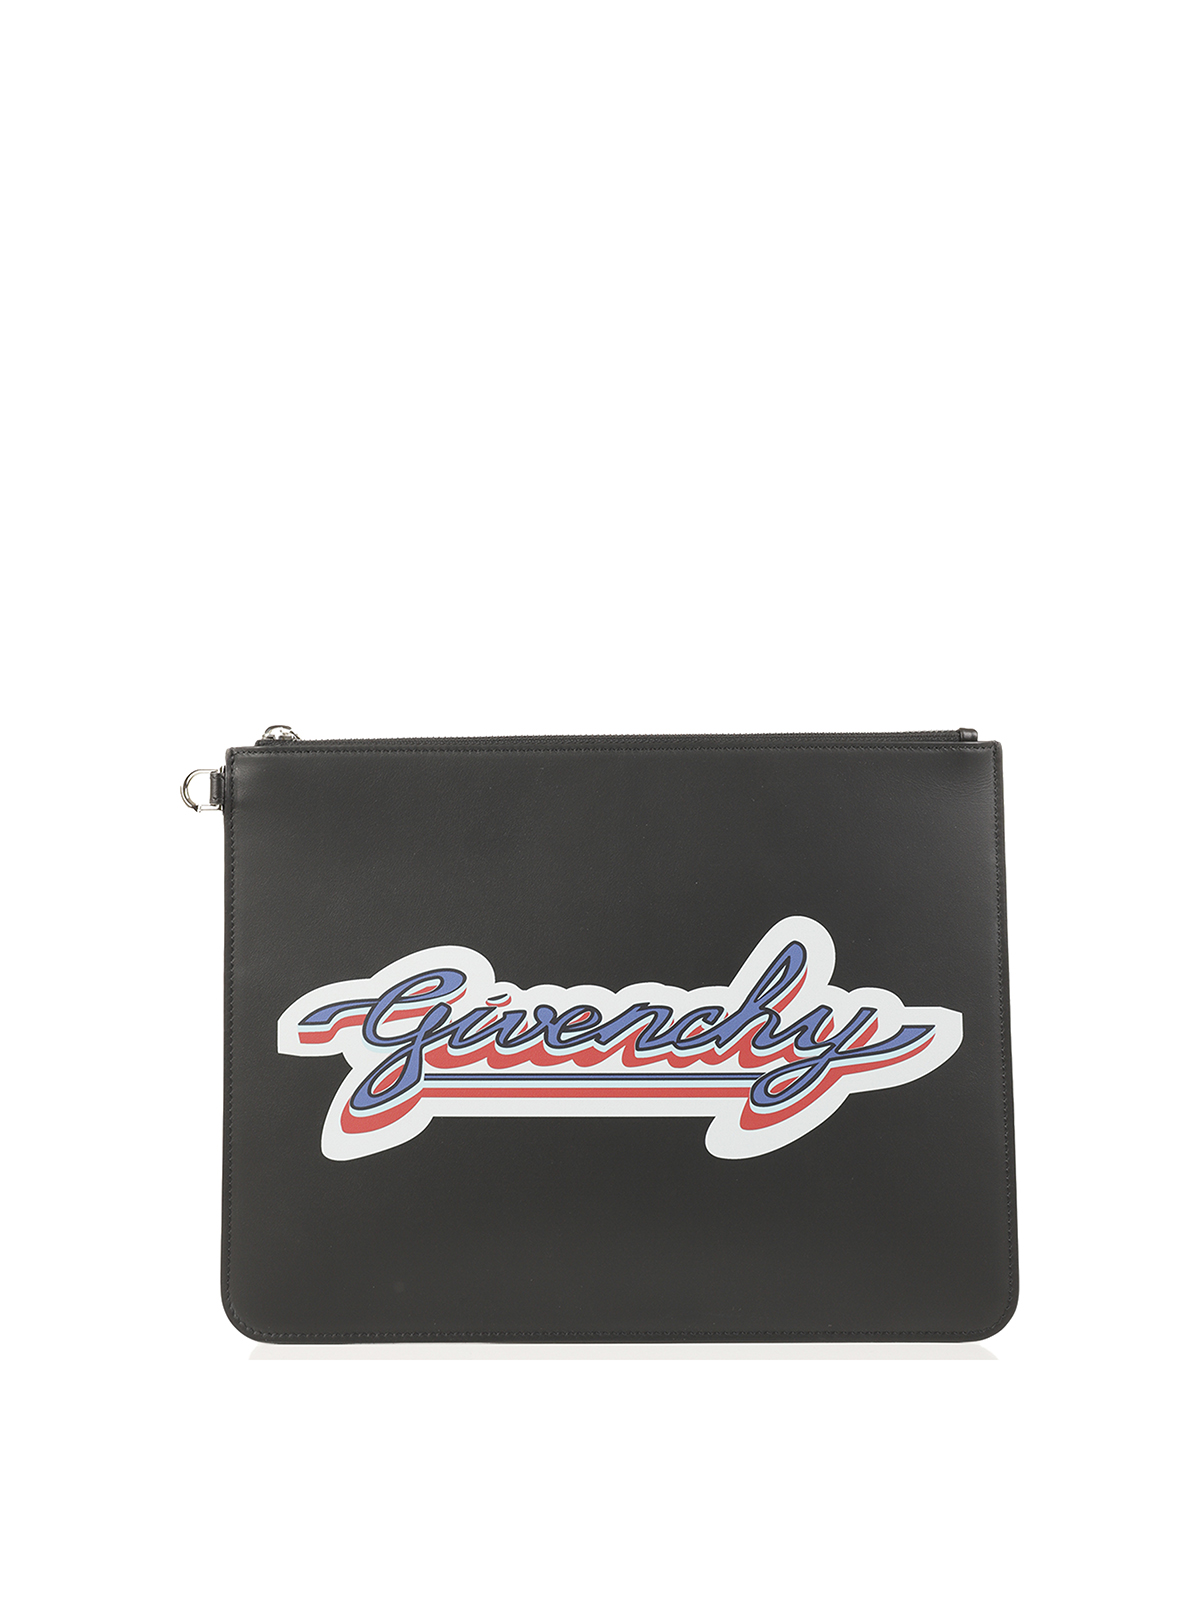 GIVENCHY LEATHER CLUTCH BAG